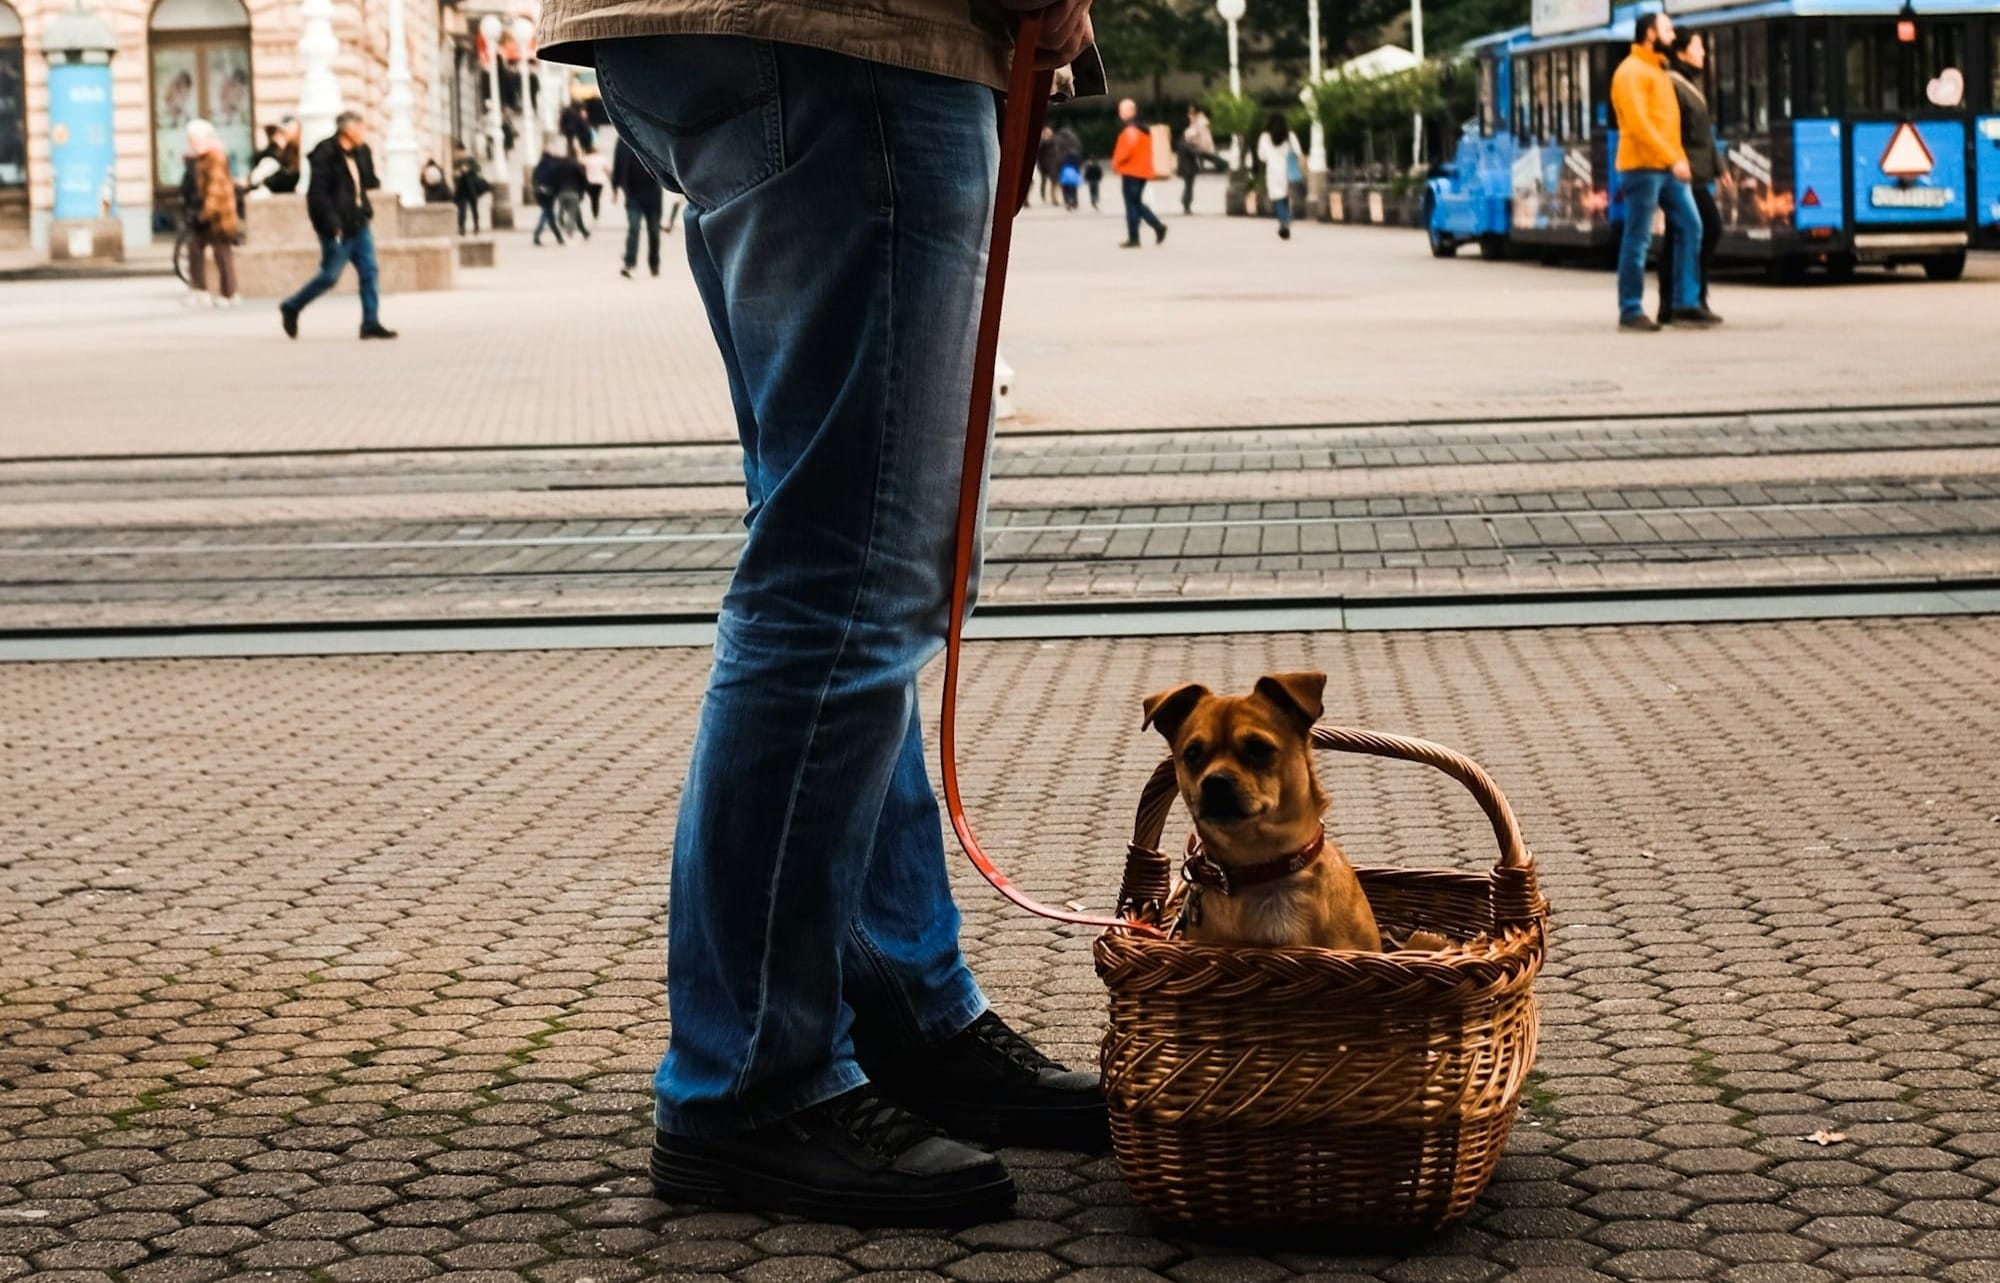 City Life with a Reactive Dog